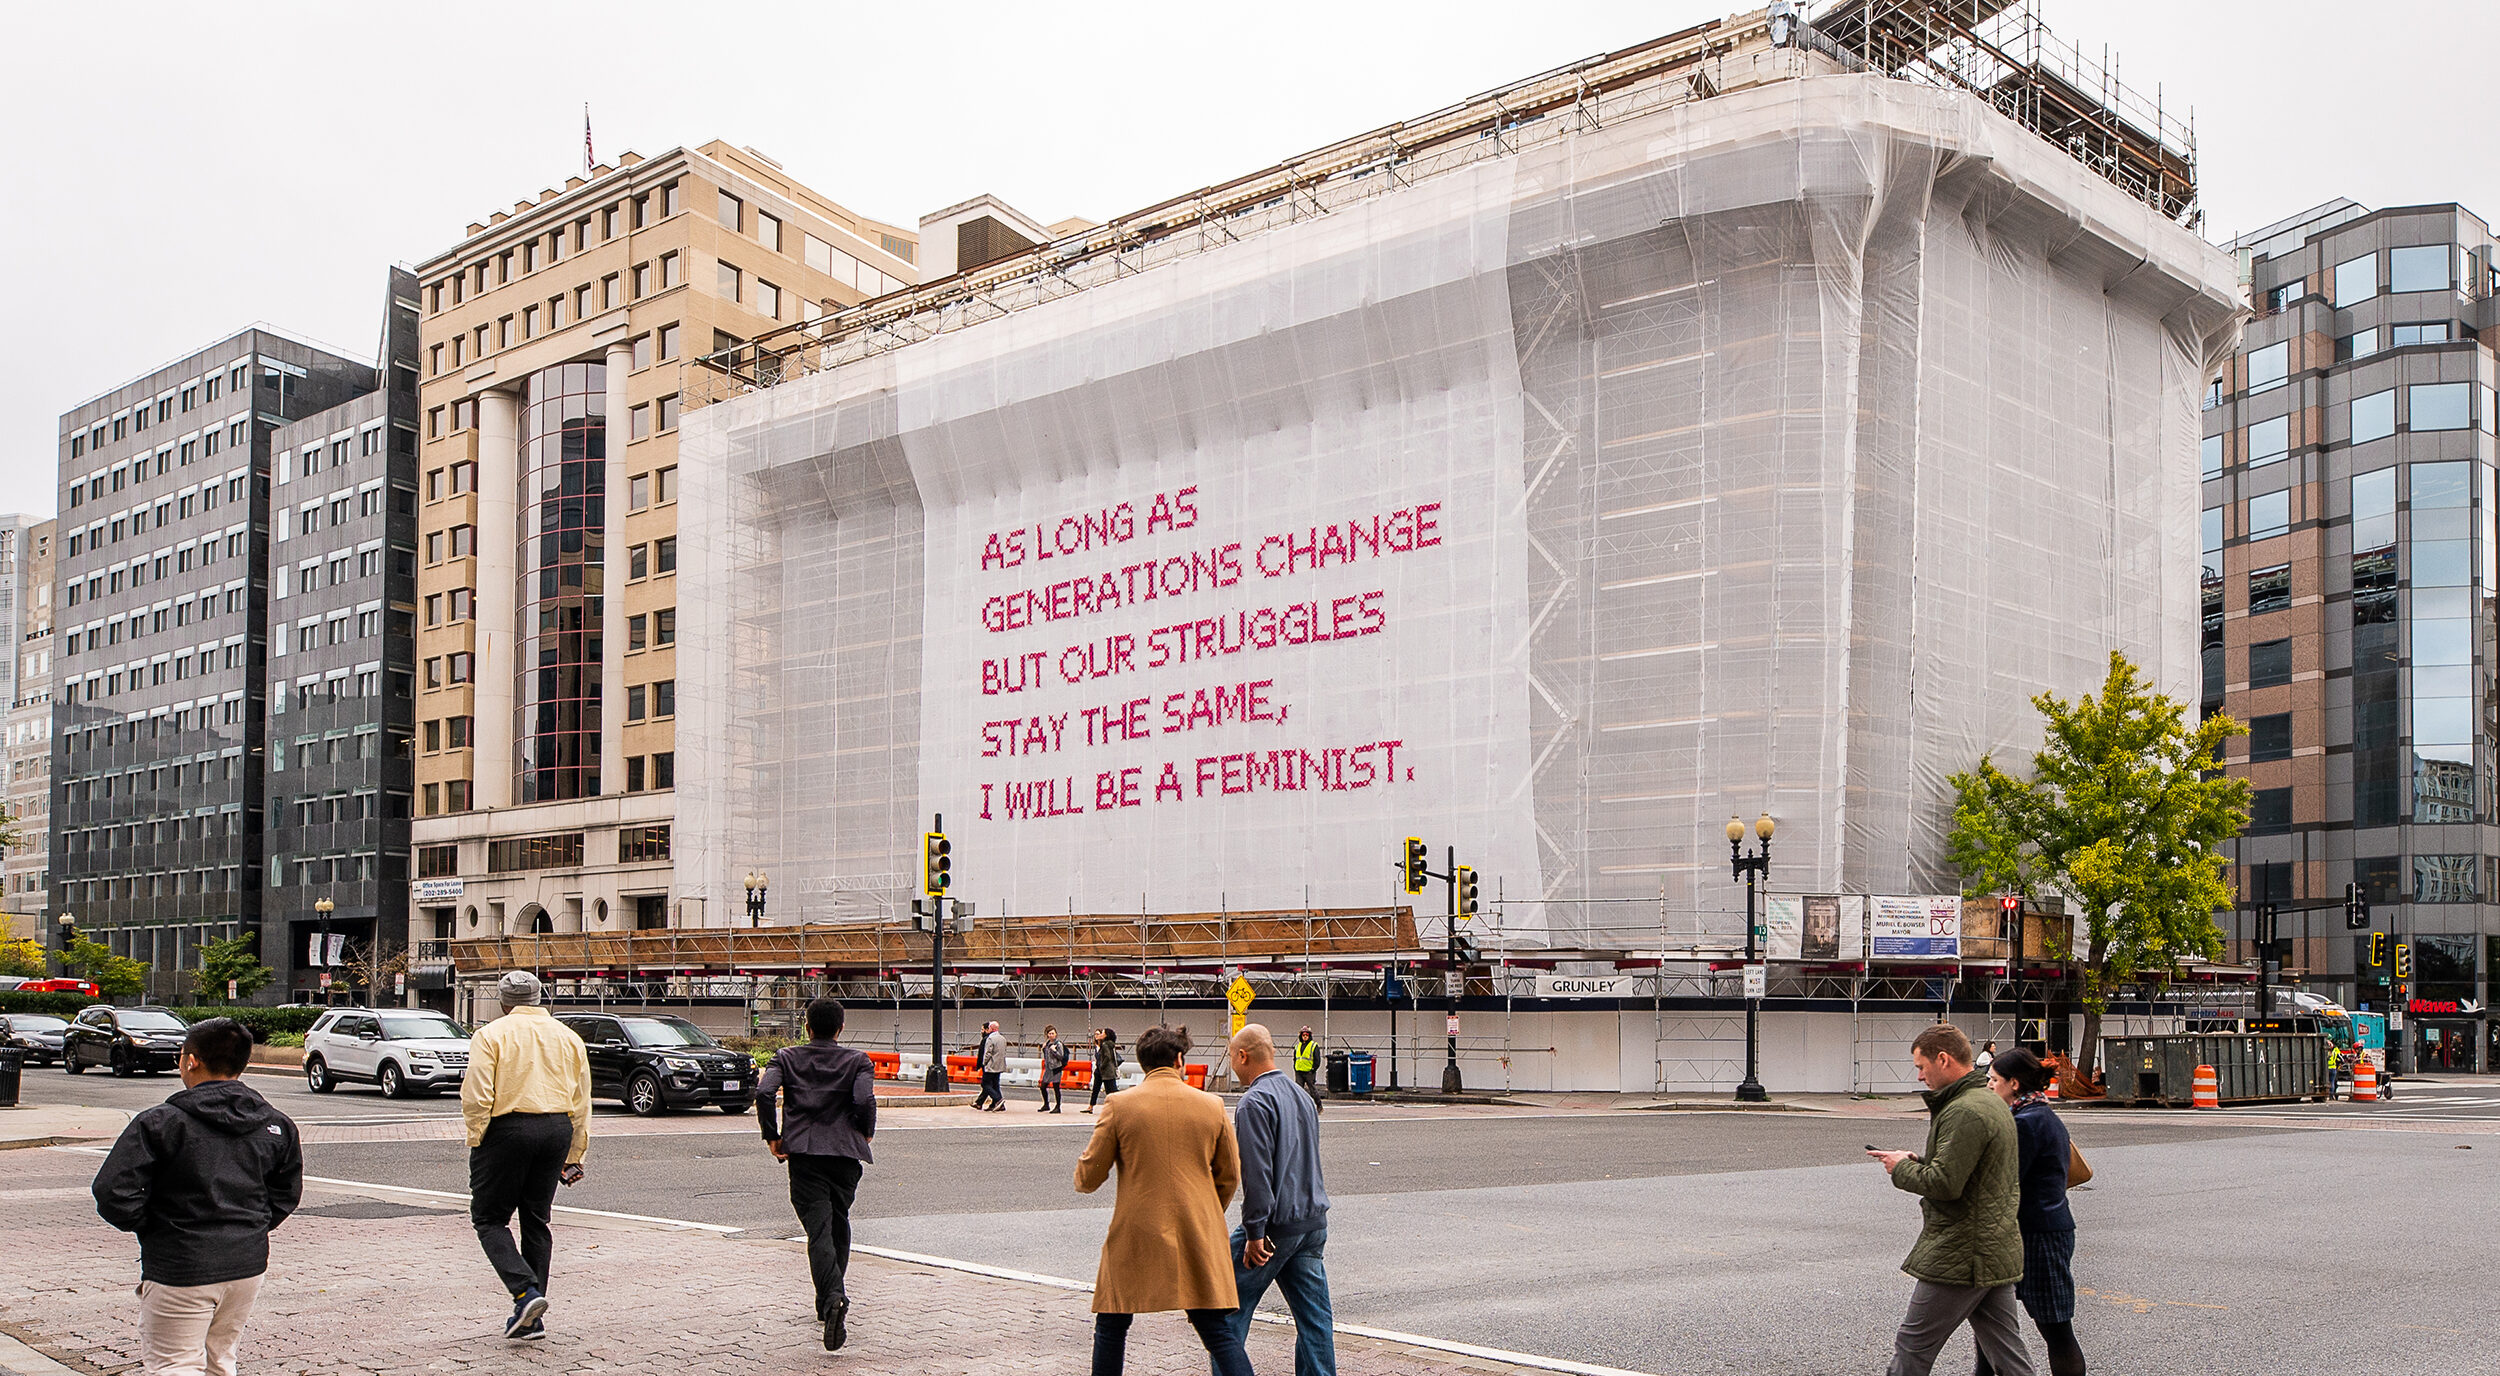 White gauzy fabric hangs in front of scaffolding surrounding a city building. Bold magenta letters on the fabric read, “As long as generations change but our struggles stay the same, I will be a feminist.” Several passersby cross the street in front of the building.